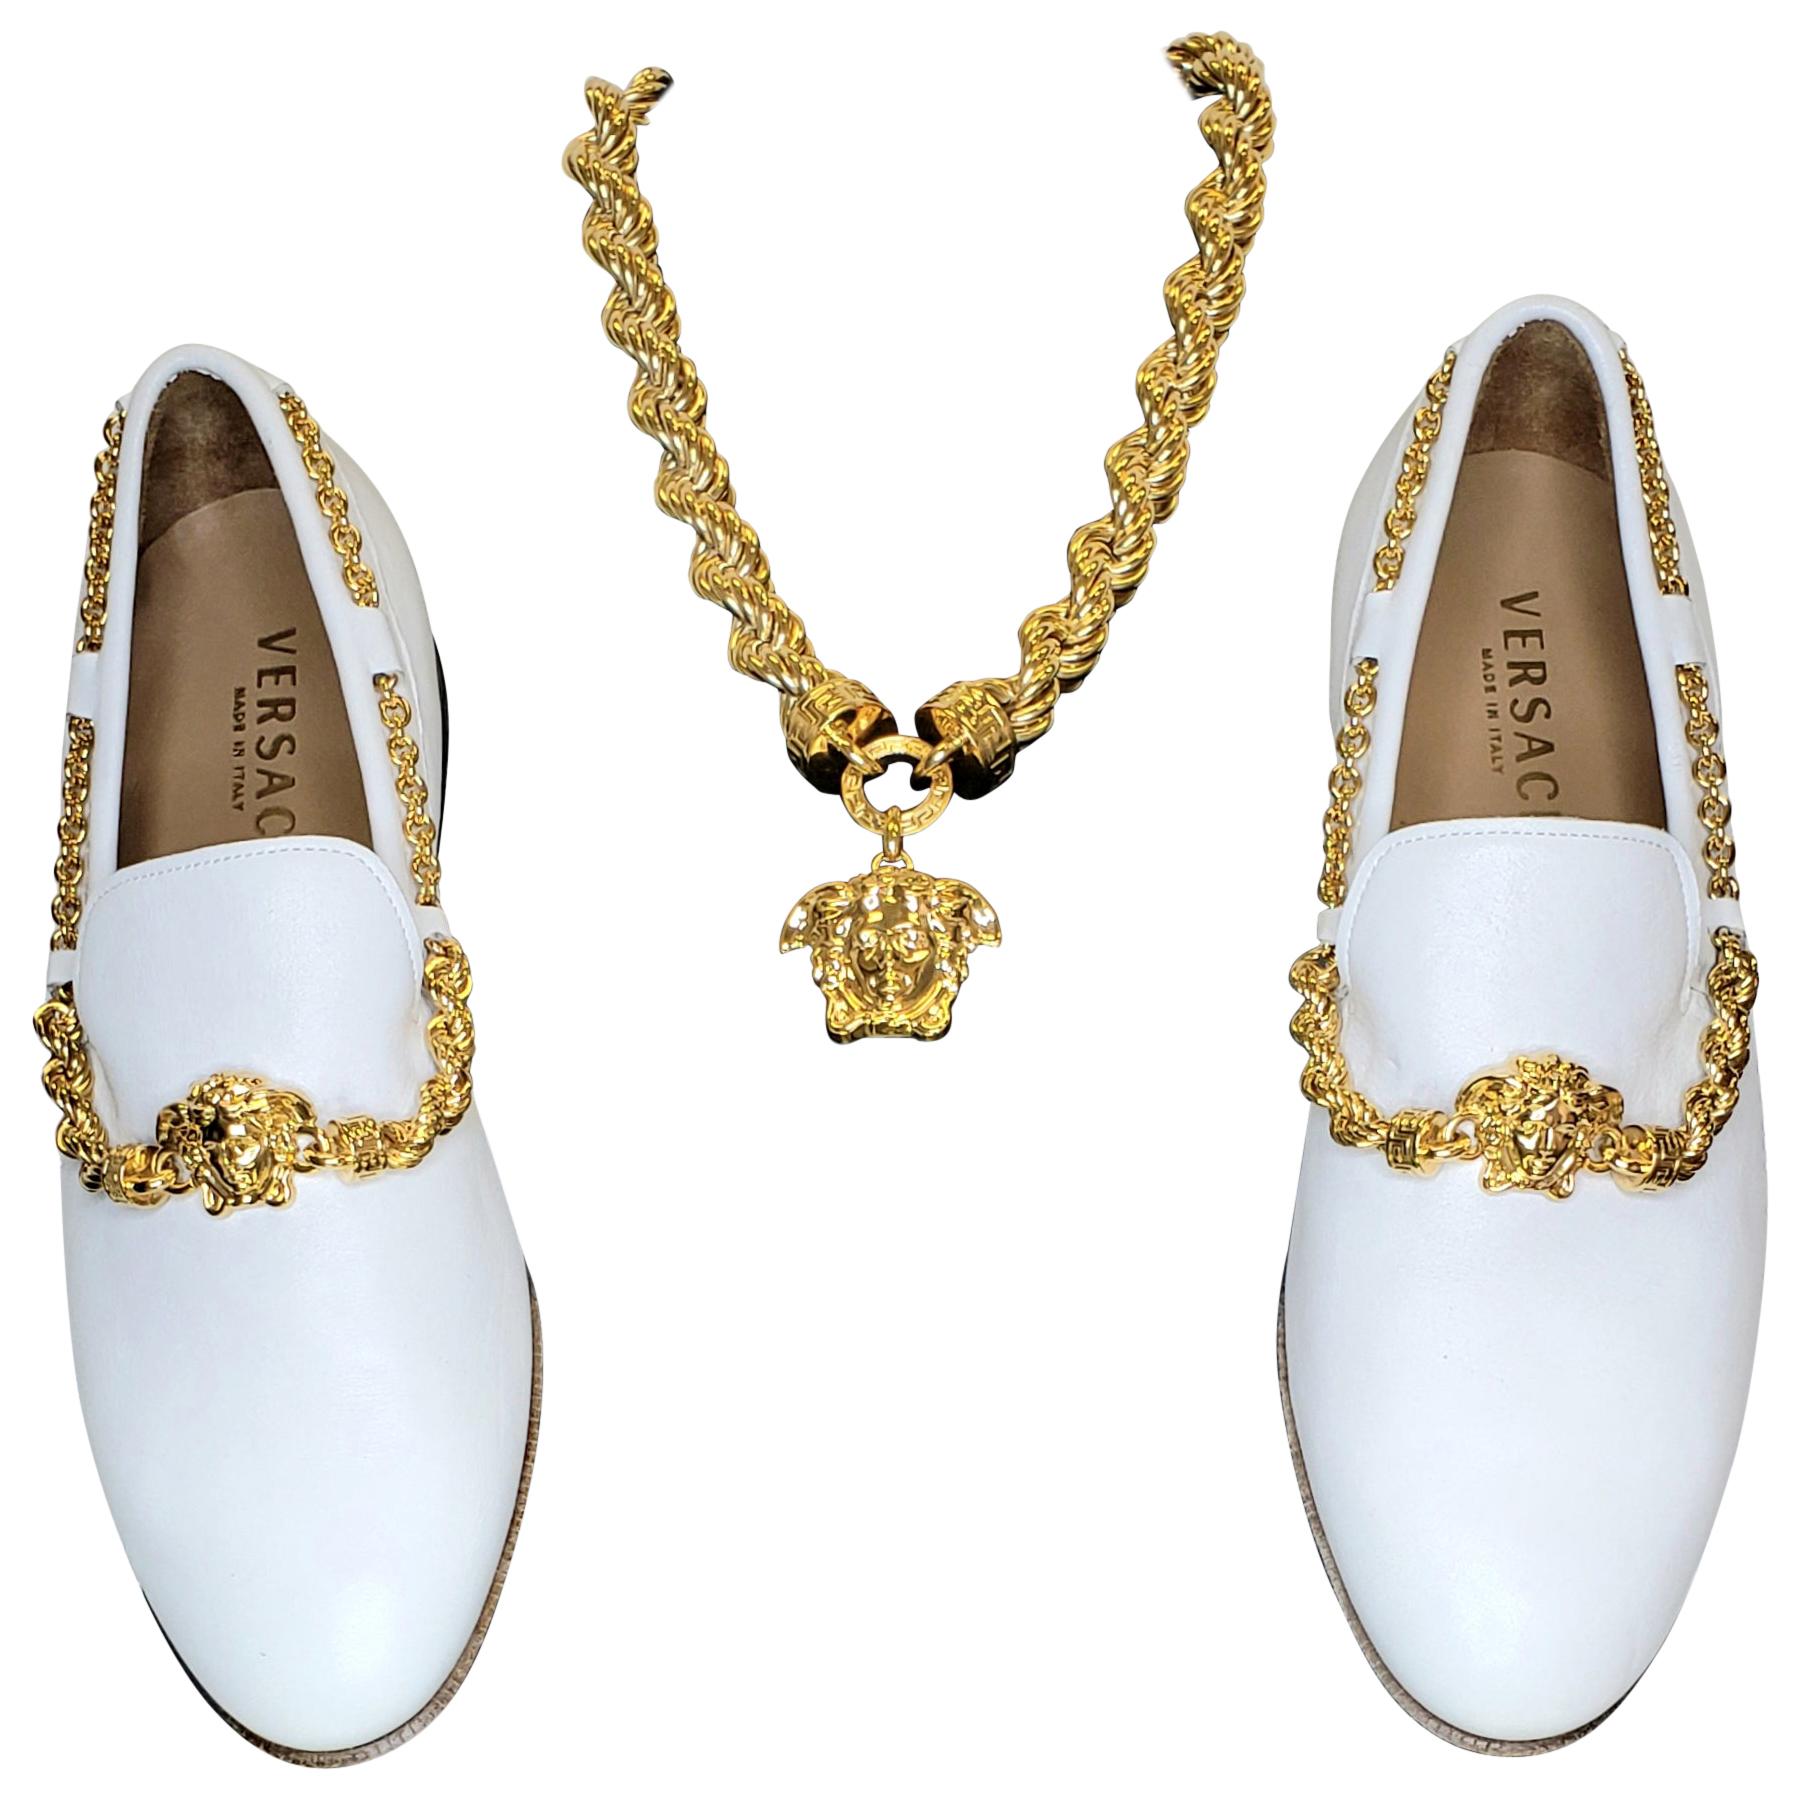 SS 2015 VERSACE WHITE LEATHER LOAFER SHOES w/ GOLD PLATED HARDWARE Size 44 - 11 1